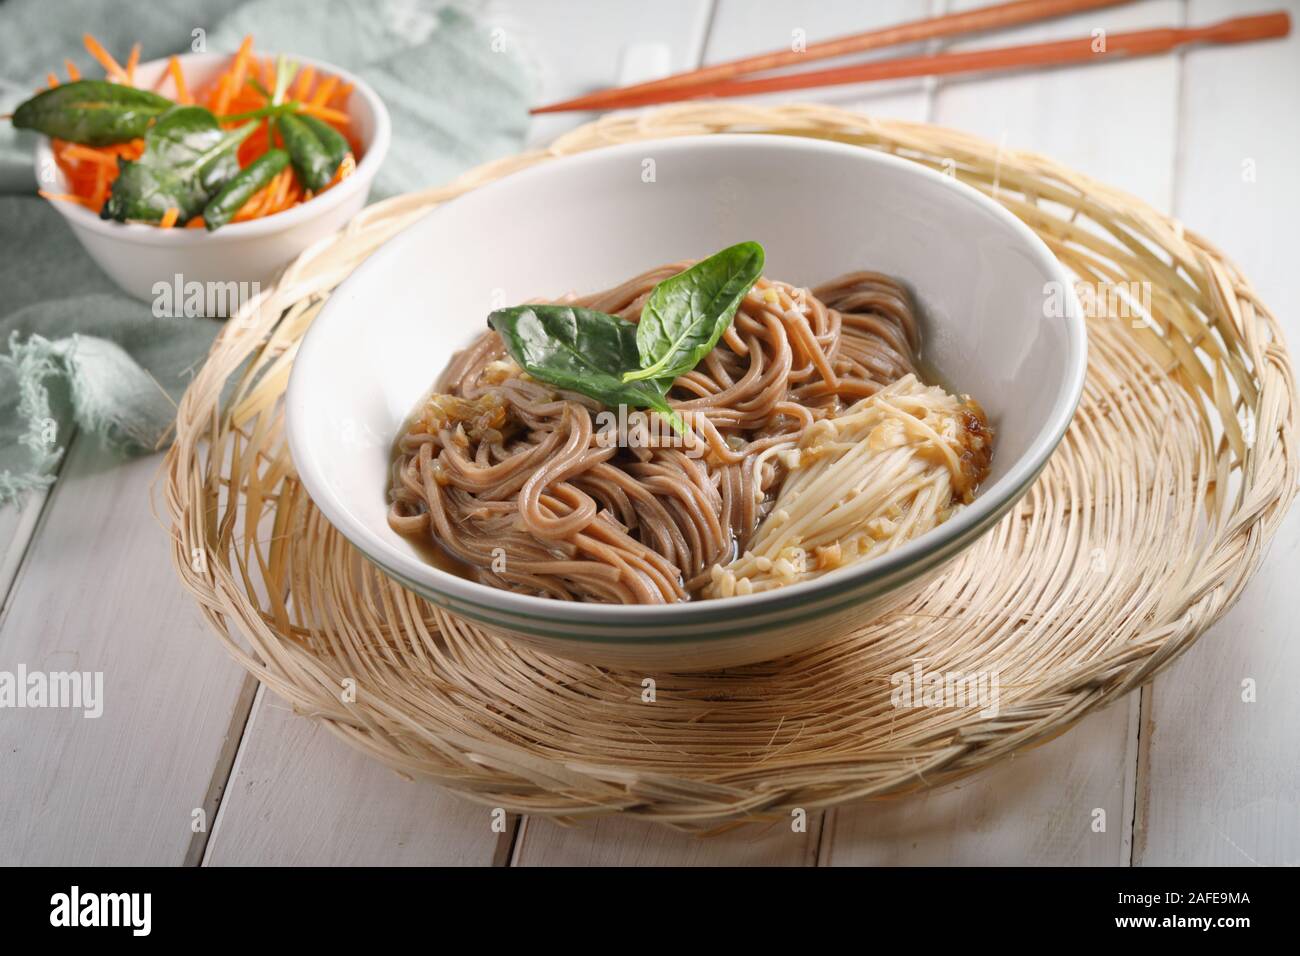 Japanese soup with Enoki mushrooms, soba noodles, spinach, carrot, and soy sauce Stock Photo